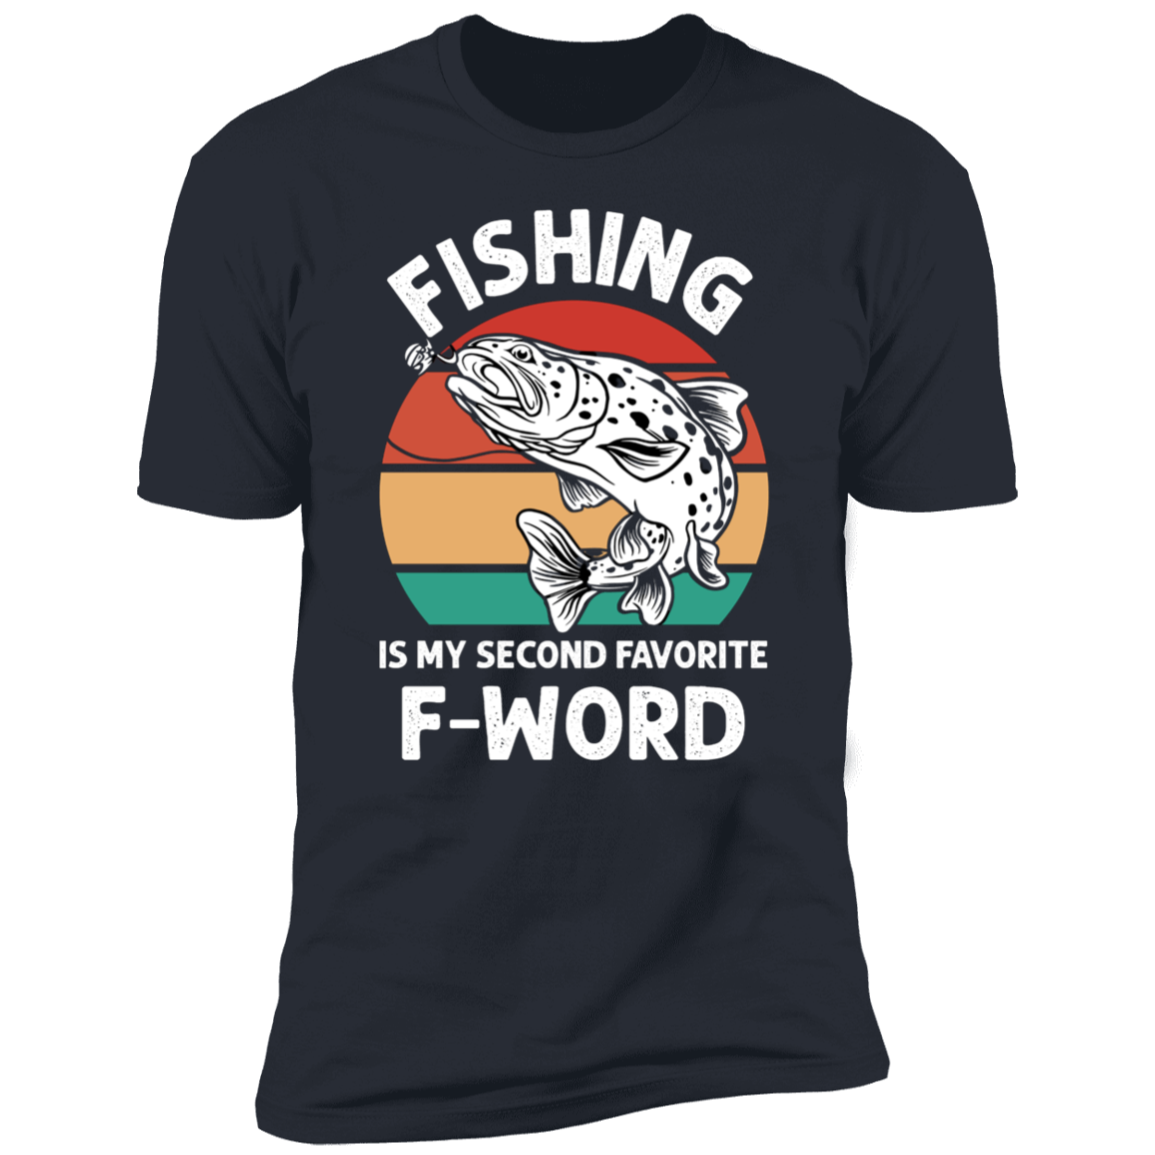 Fishing is my second favorite F-word